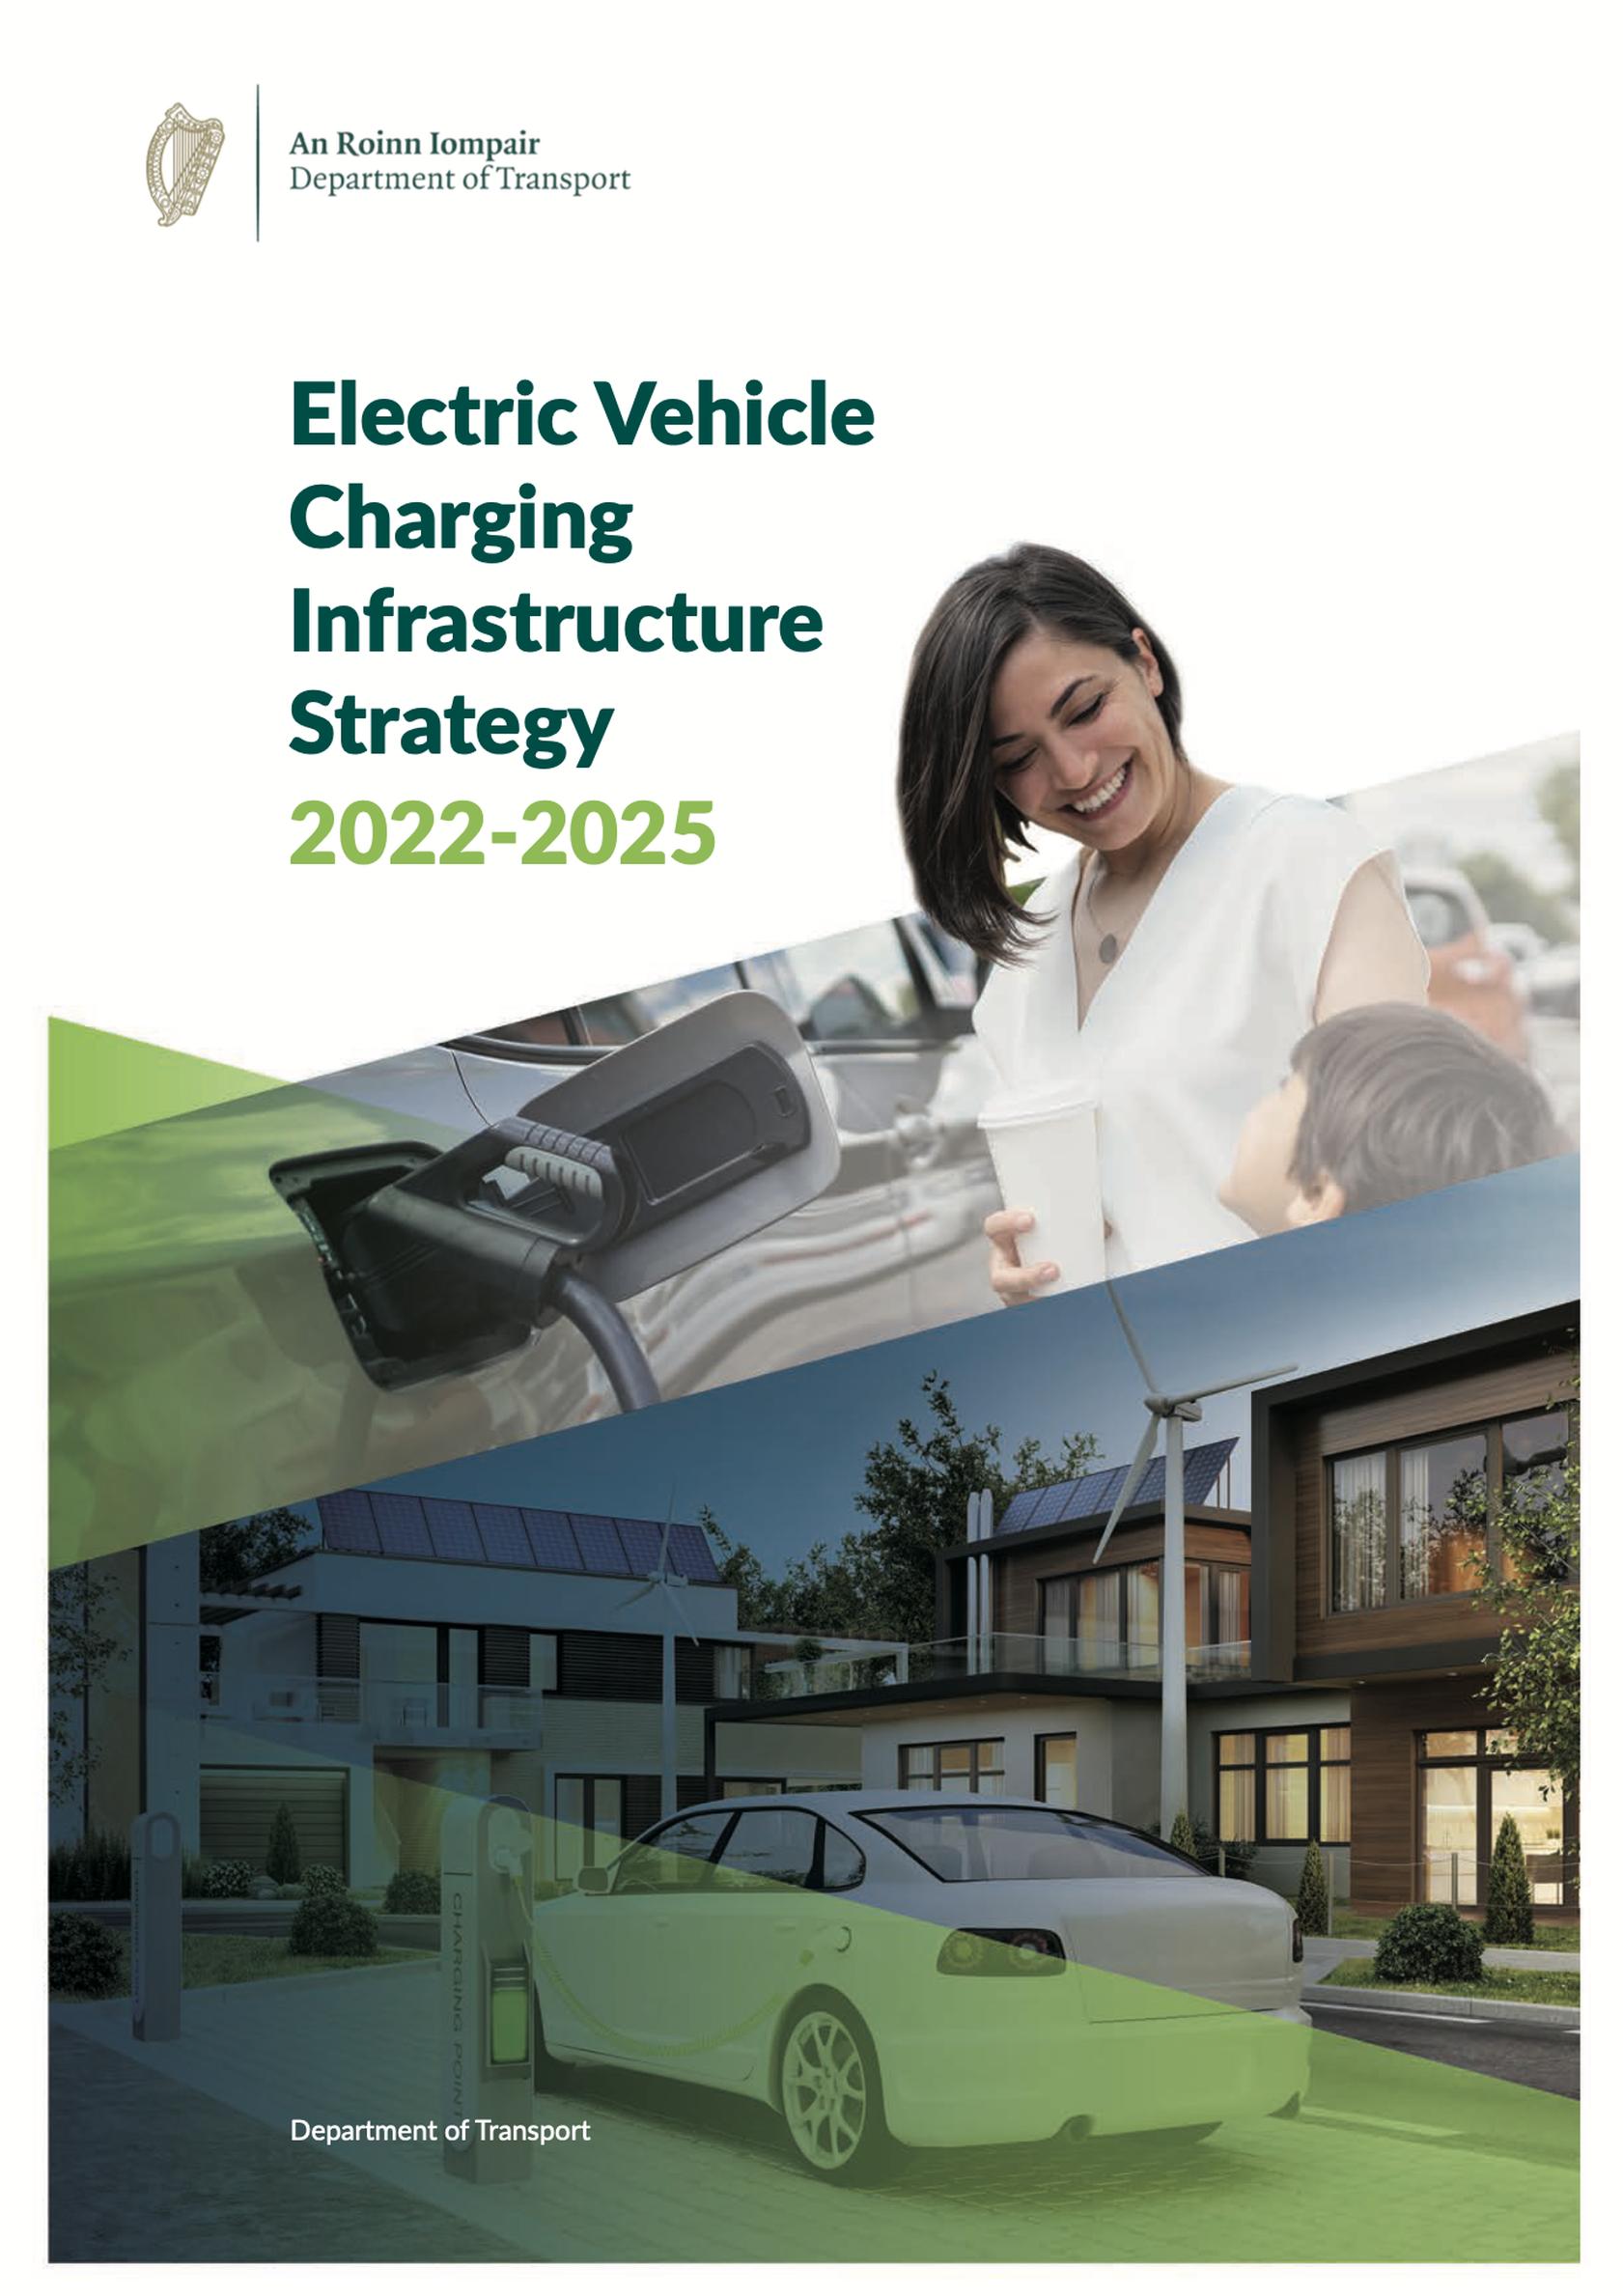 Electric Vehicles Charging Infrastructure Strategy 2022-2025